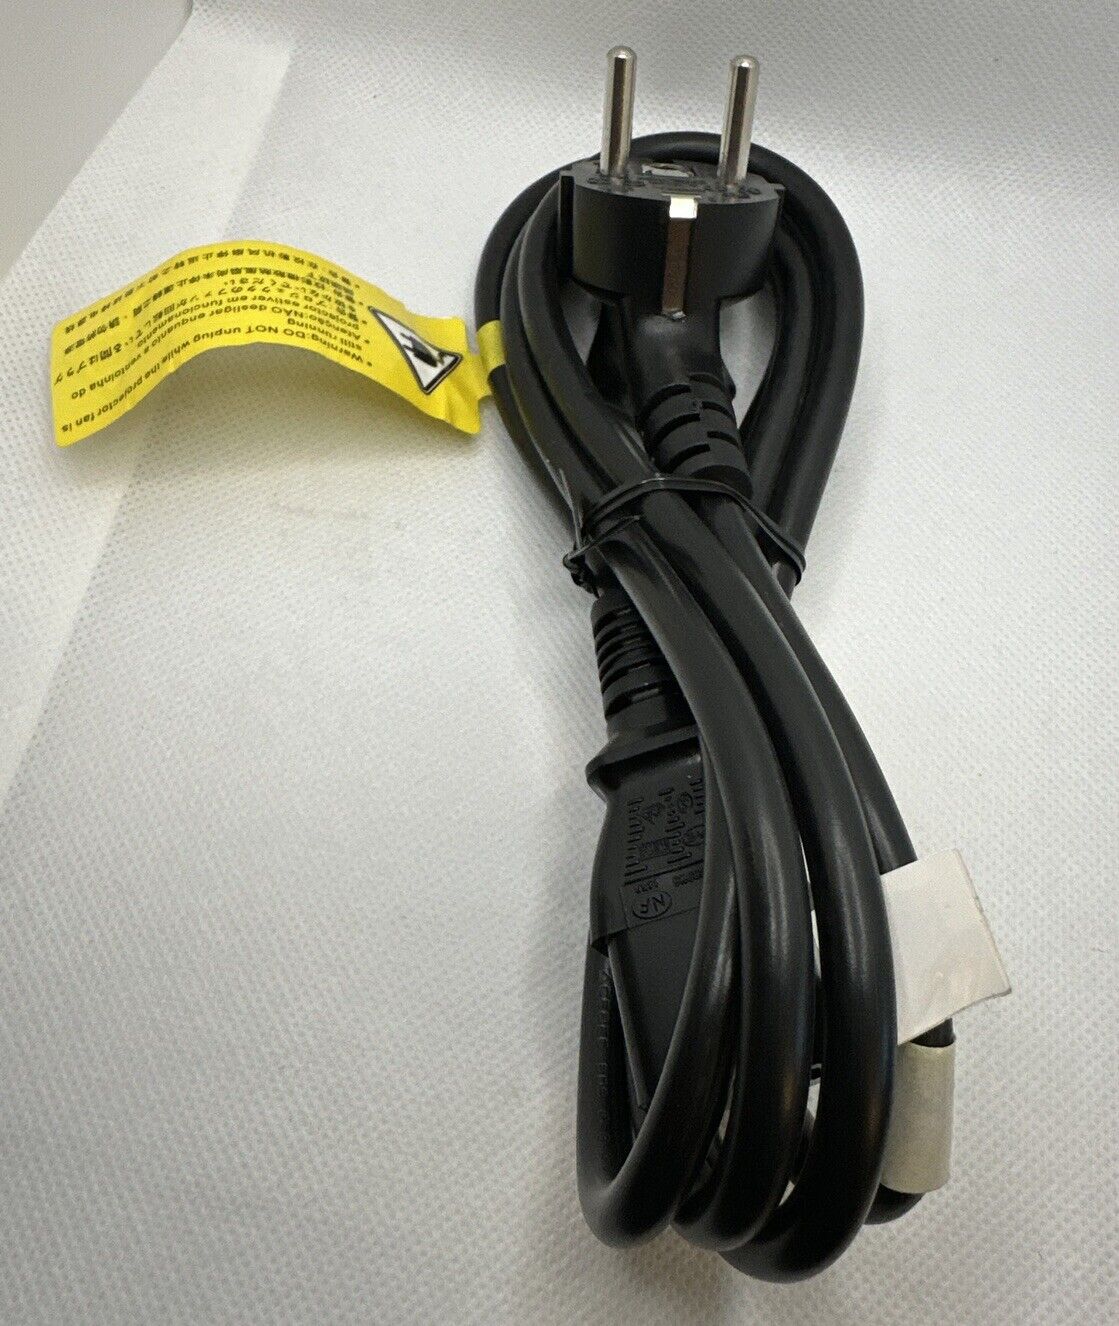 New I-Sheng SP-023 16A 250W European Outlet Power Cord Black